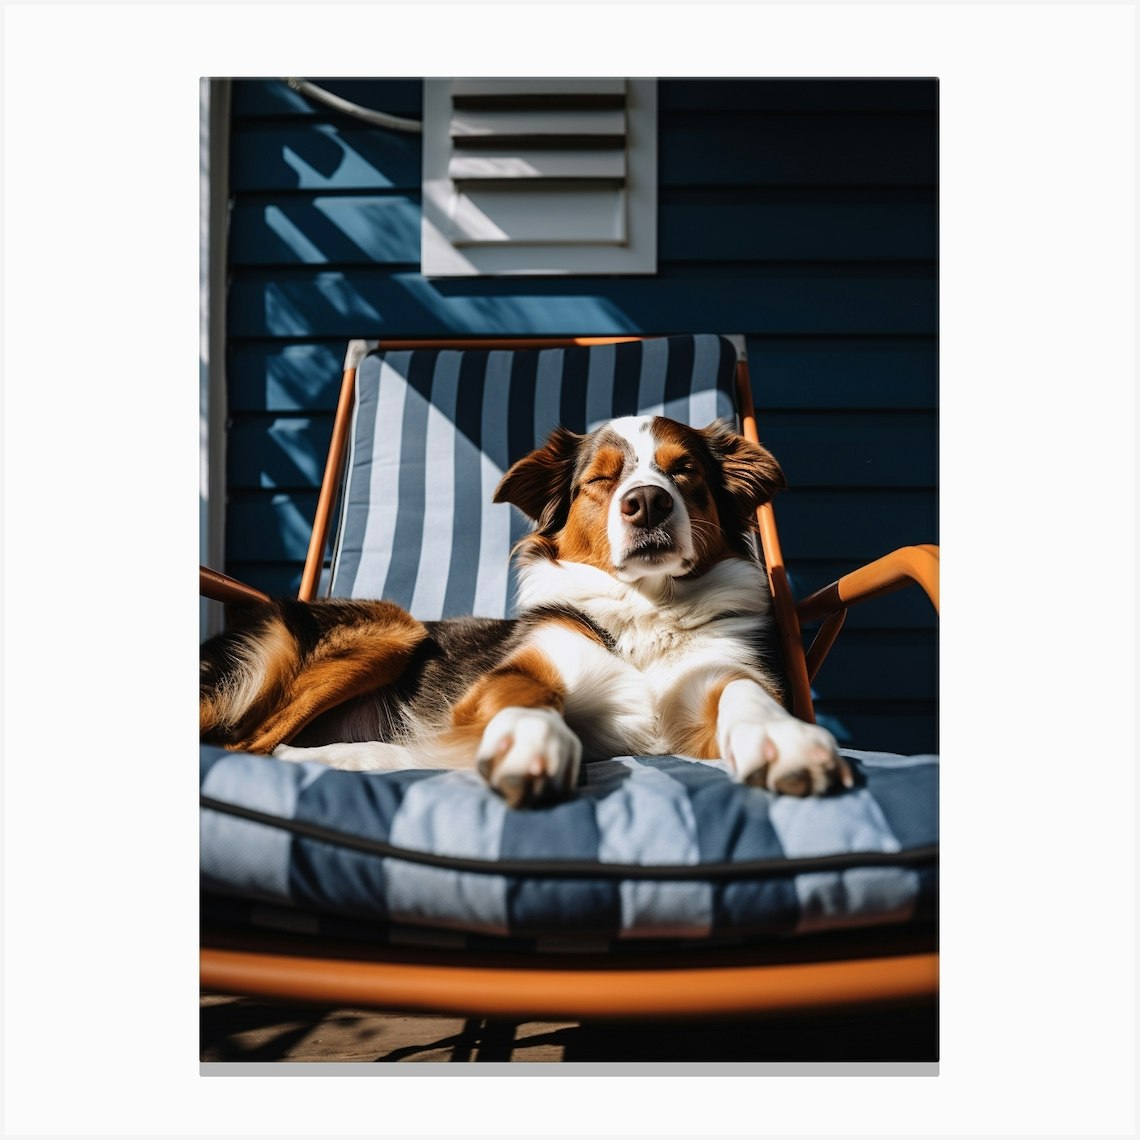 Dog Sleeping In A Lounge Chair Canvas Print by Mechelle Flowers - Fy